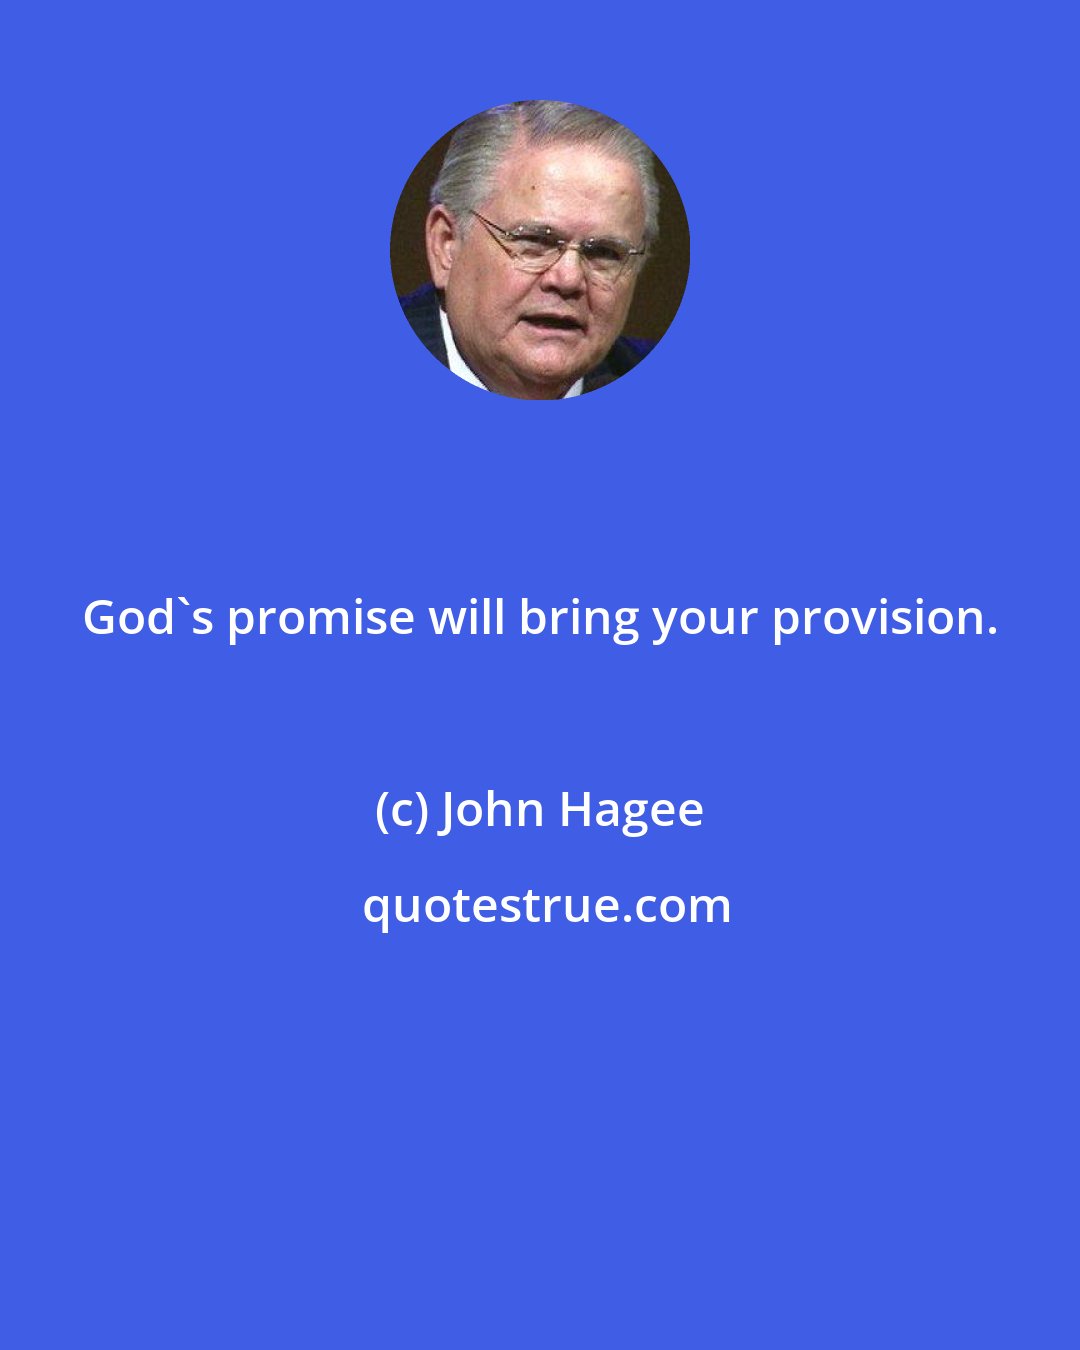 John Hagee: God's promise will bring your provision.